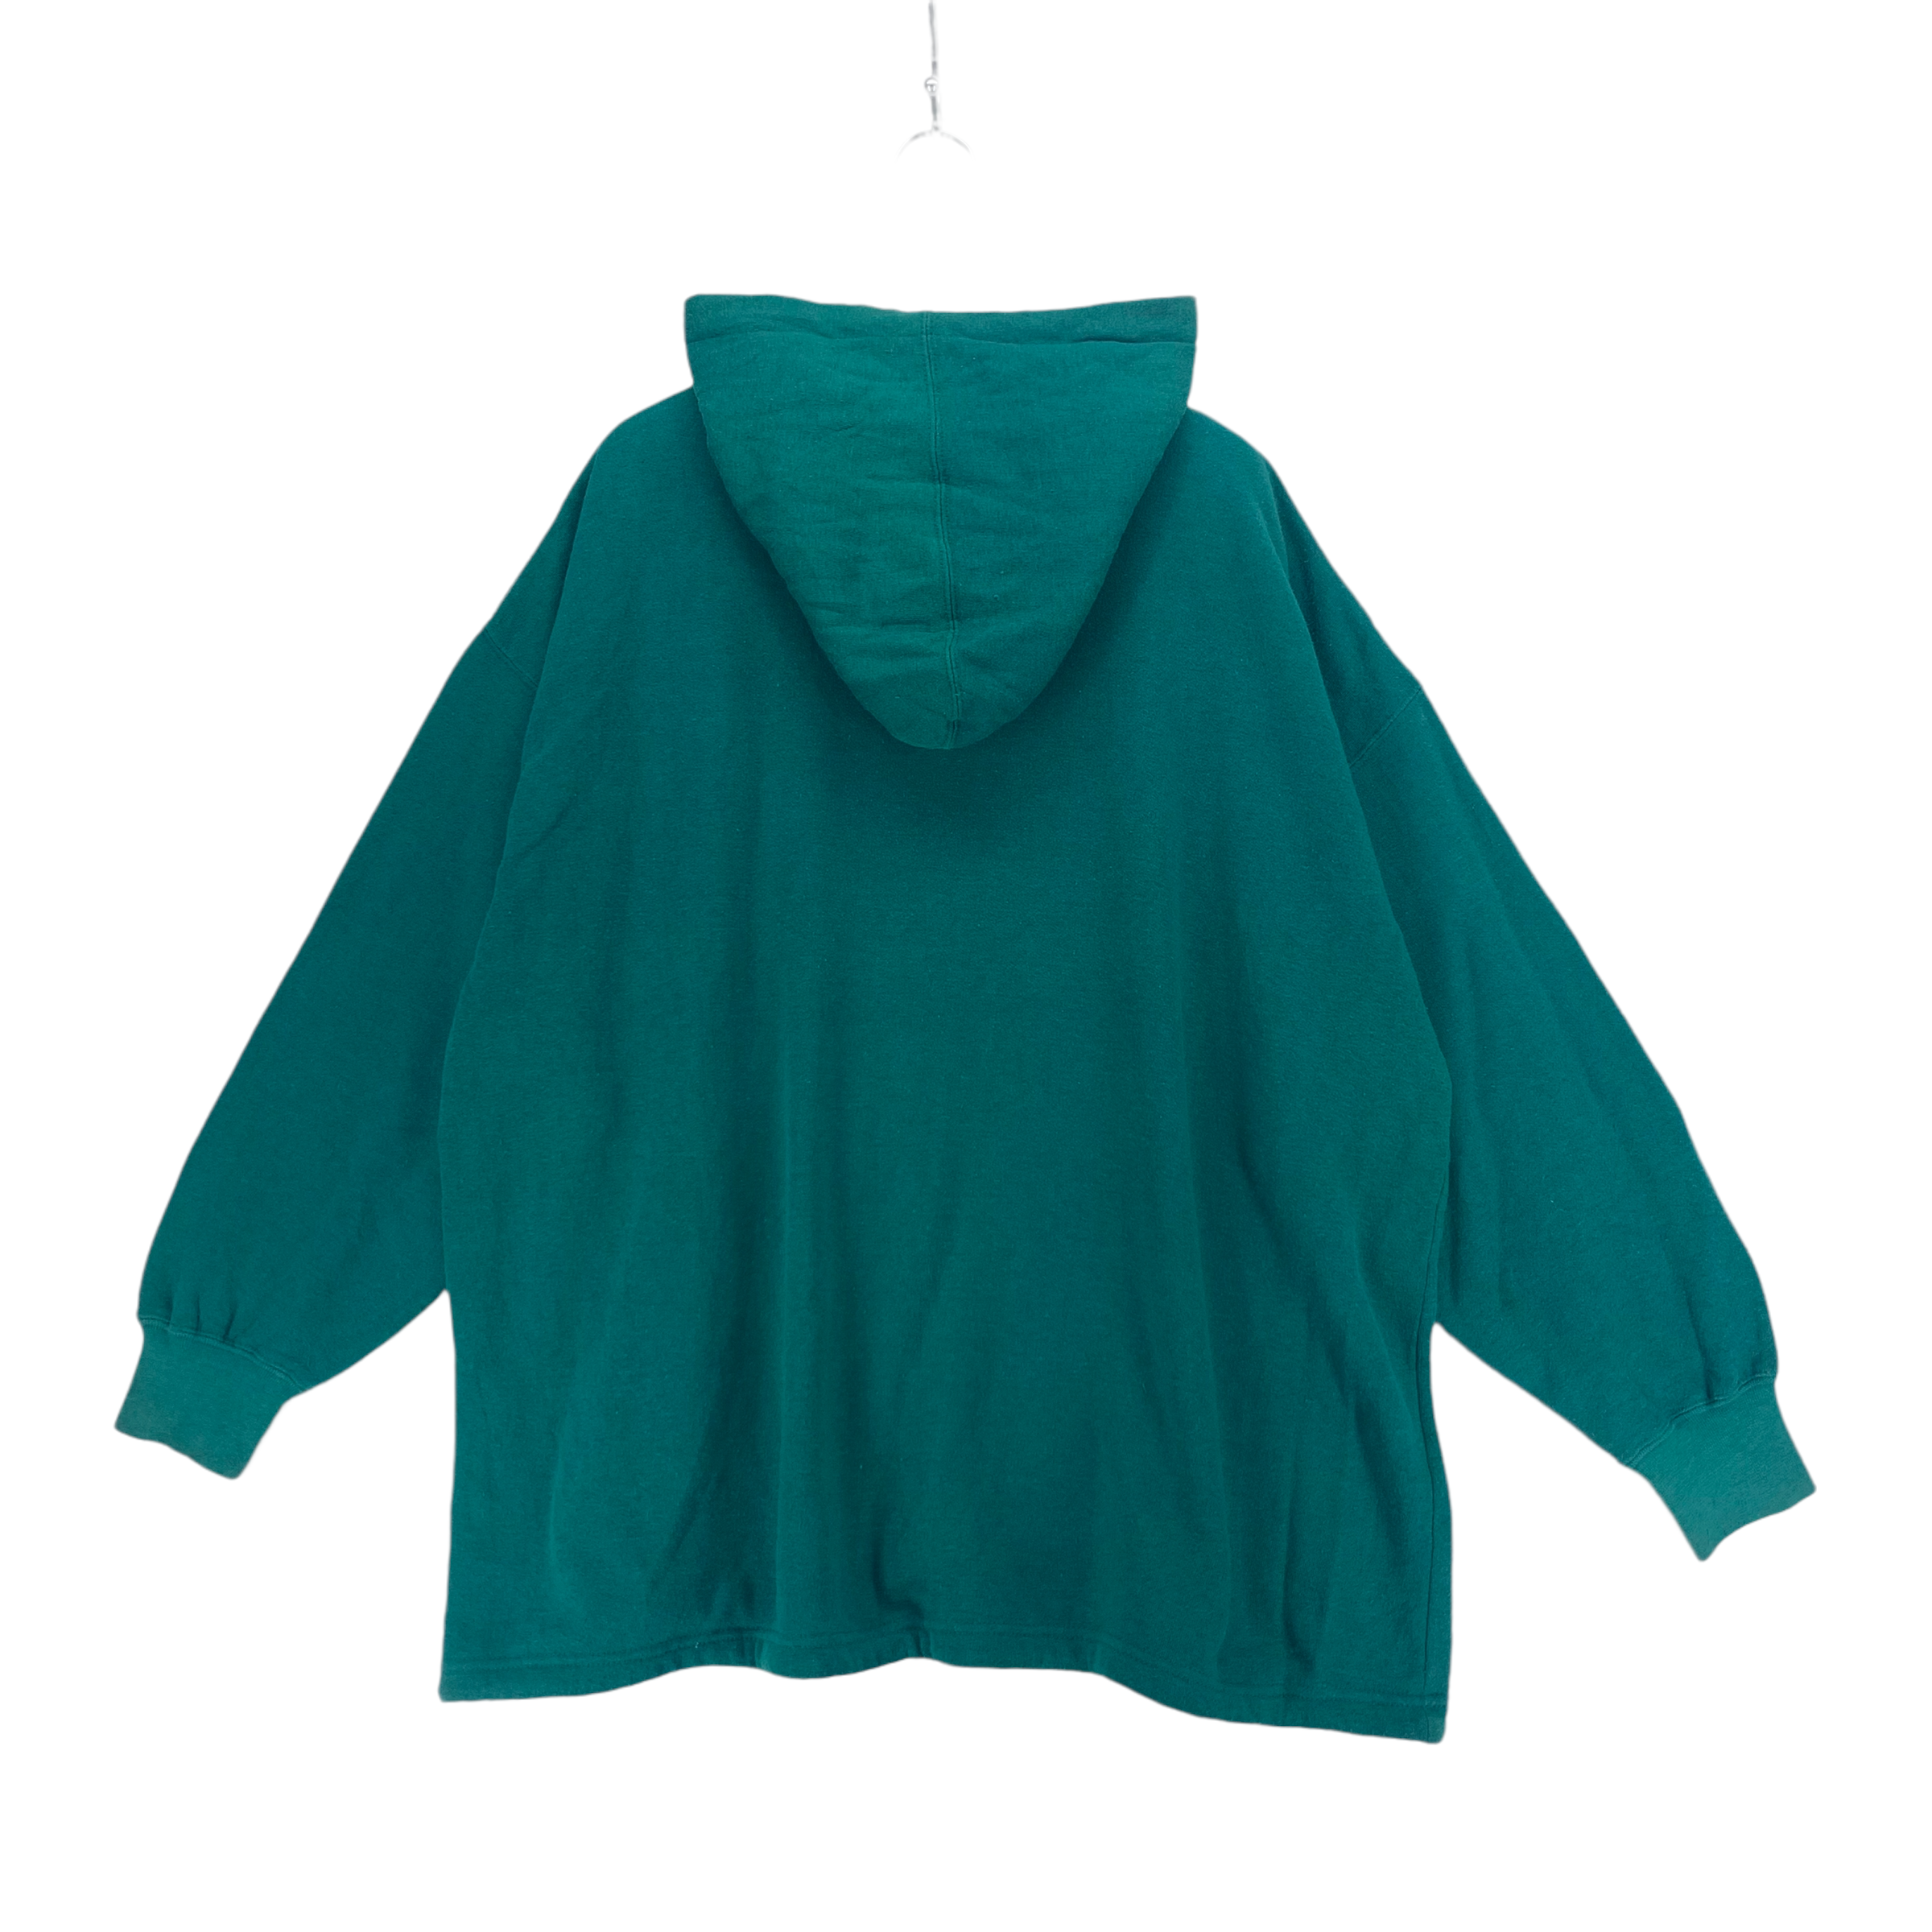 Valentino Mode Pullover Green Hoodies #3471-123 - 8